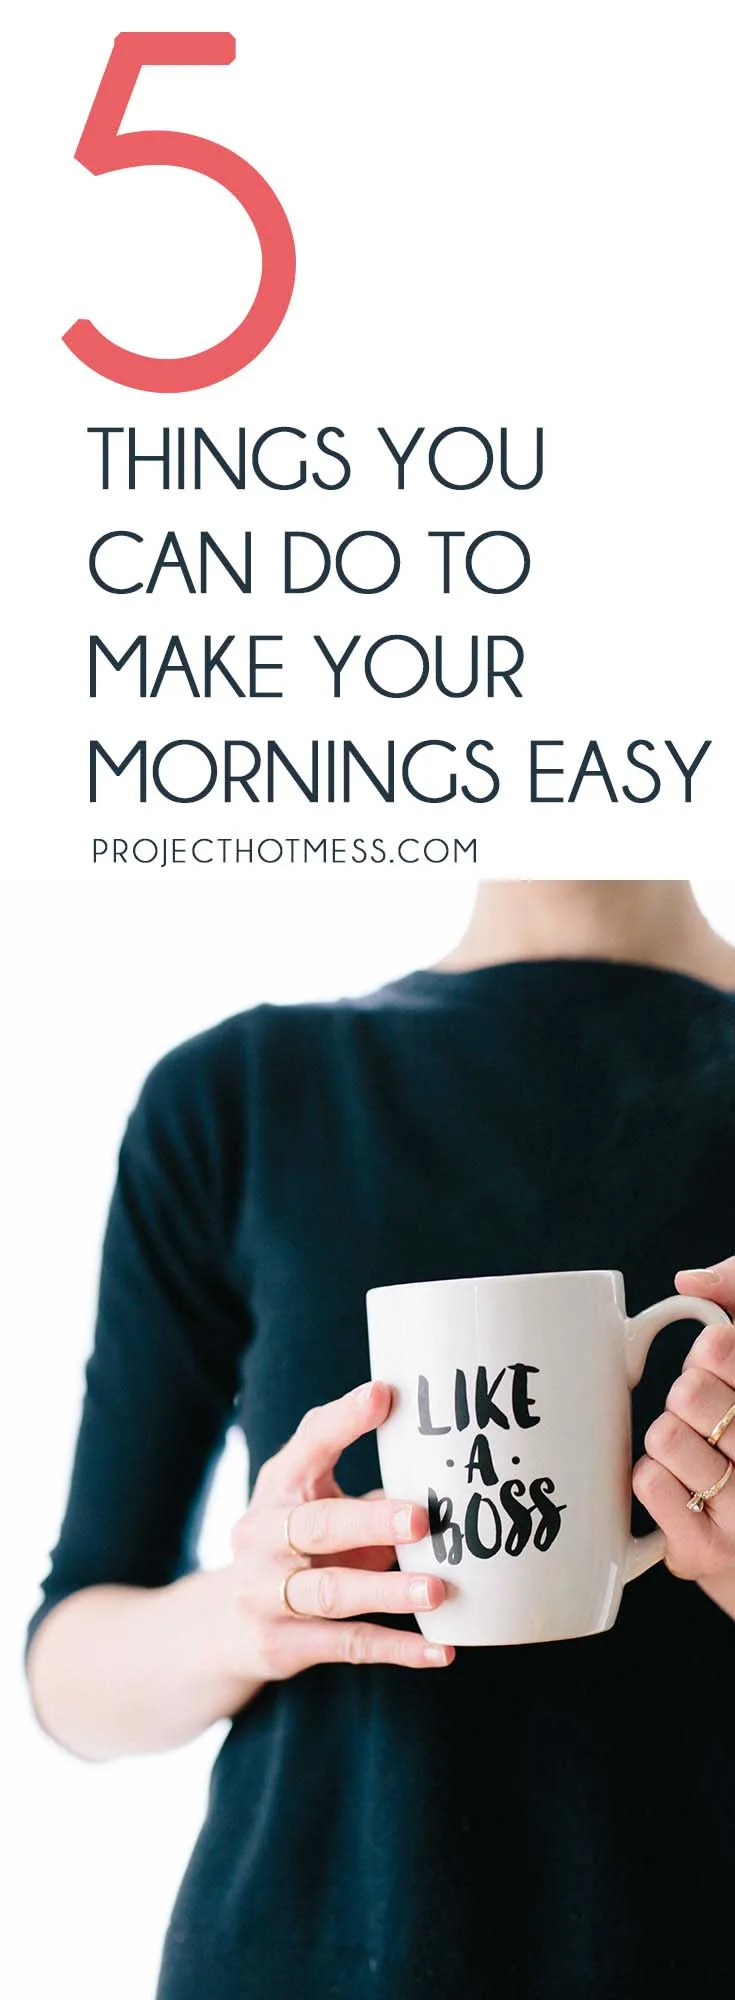 Mornings are crazy and full on so anything you can do to make your mornings easier is going to be a huge benefit. These 5 things can make mornings a breeze. #lifelessons #lifehacks